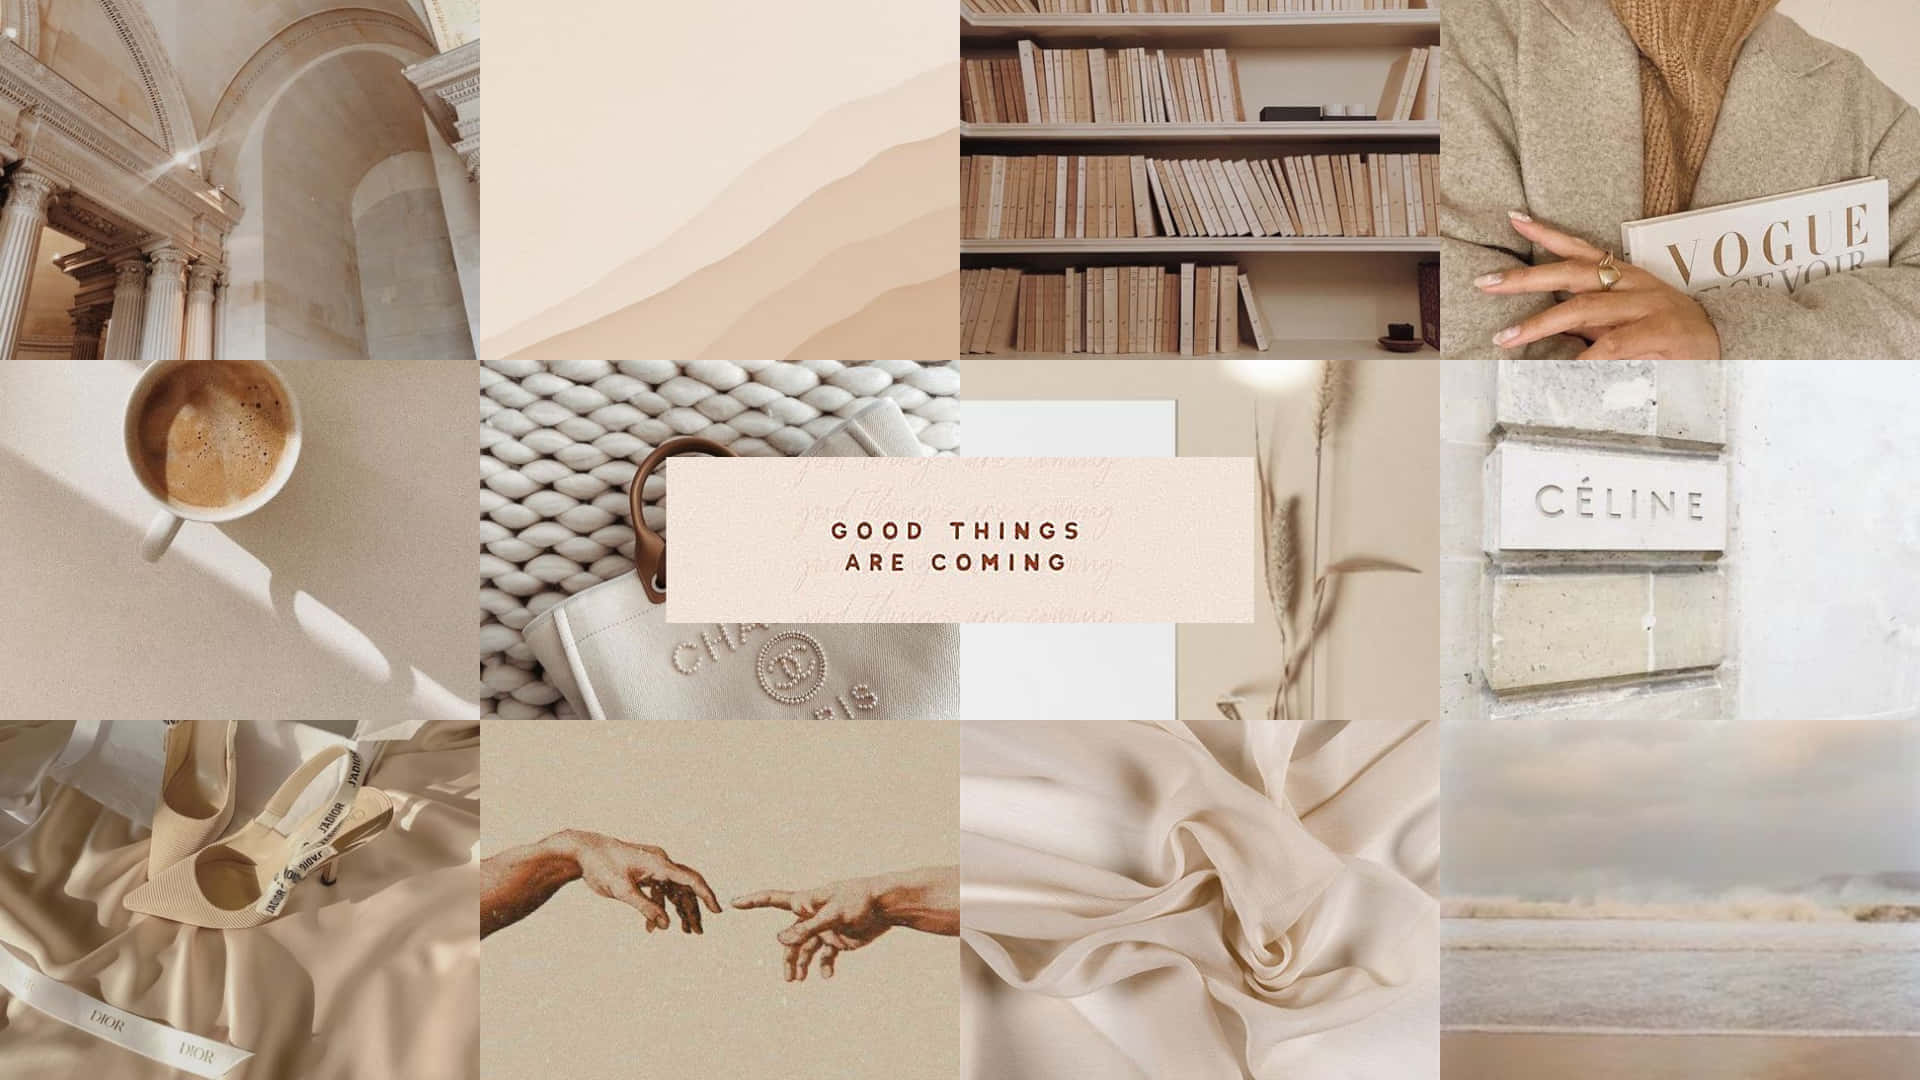 Relax your mind and take in the beauty of this neutral aesthetic background